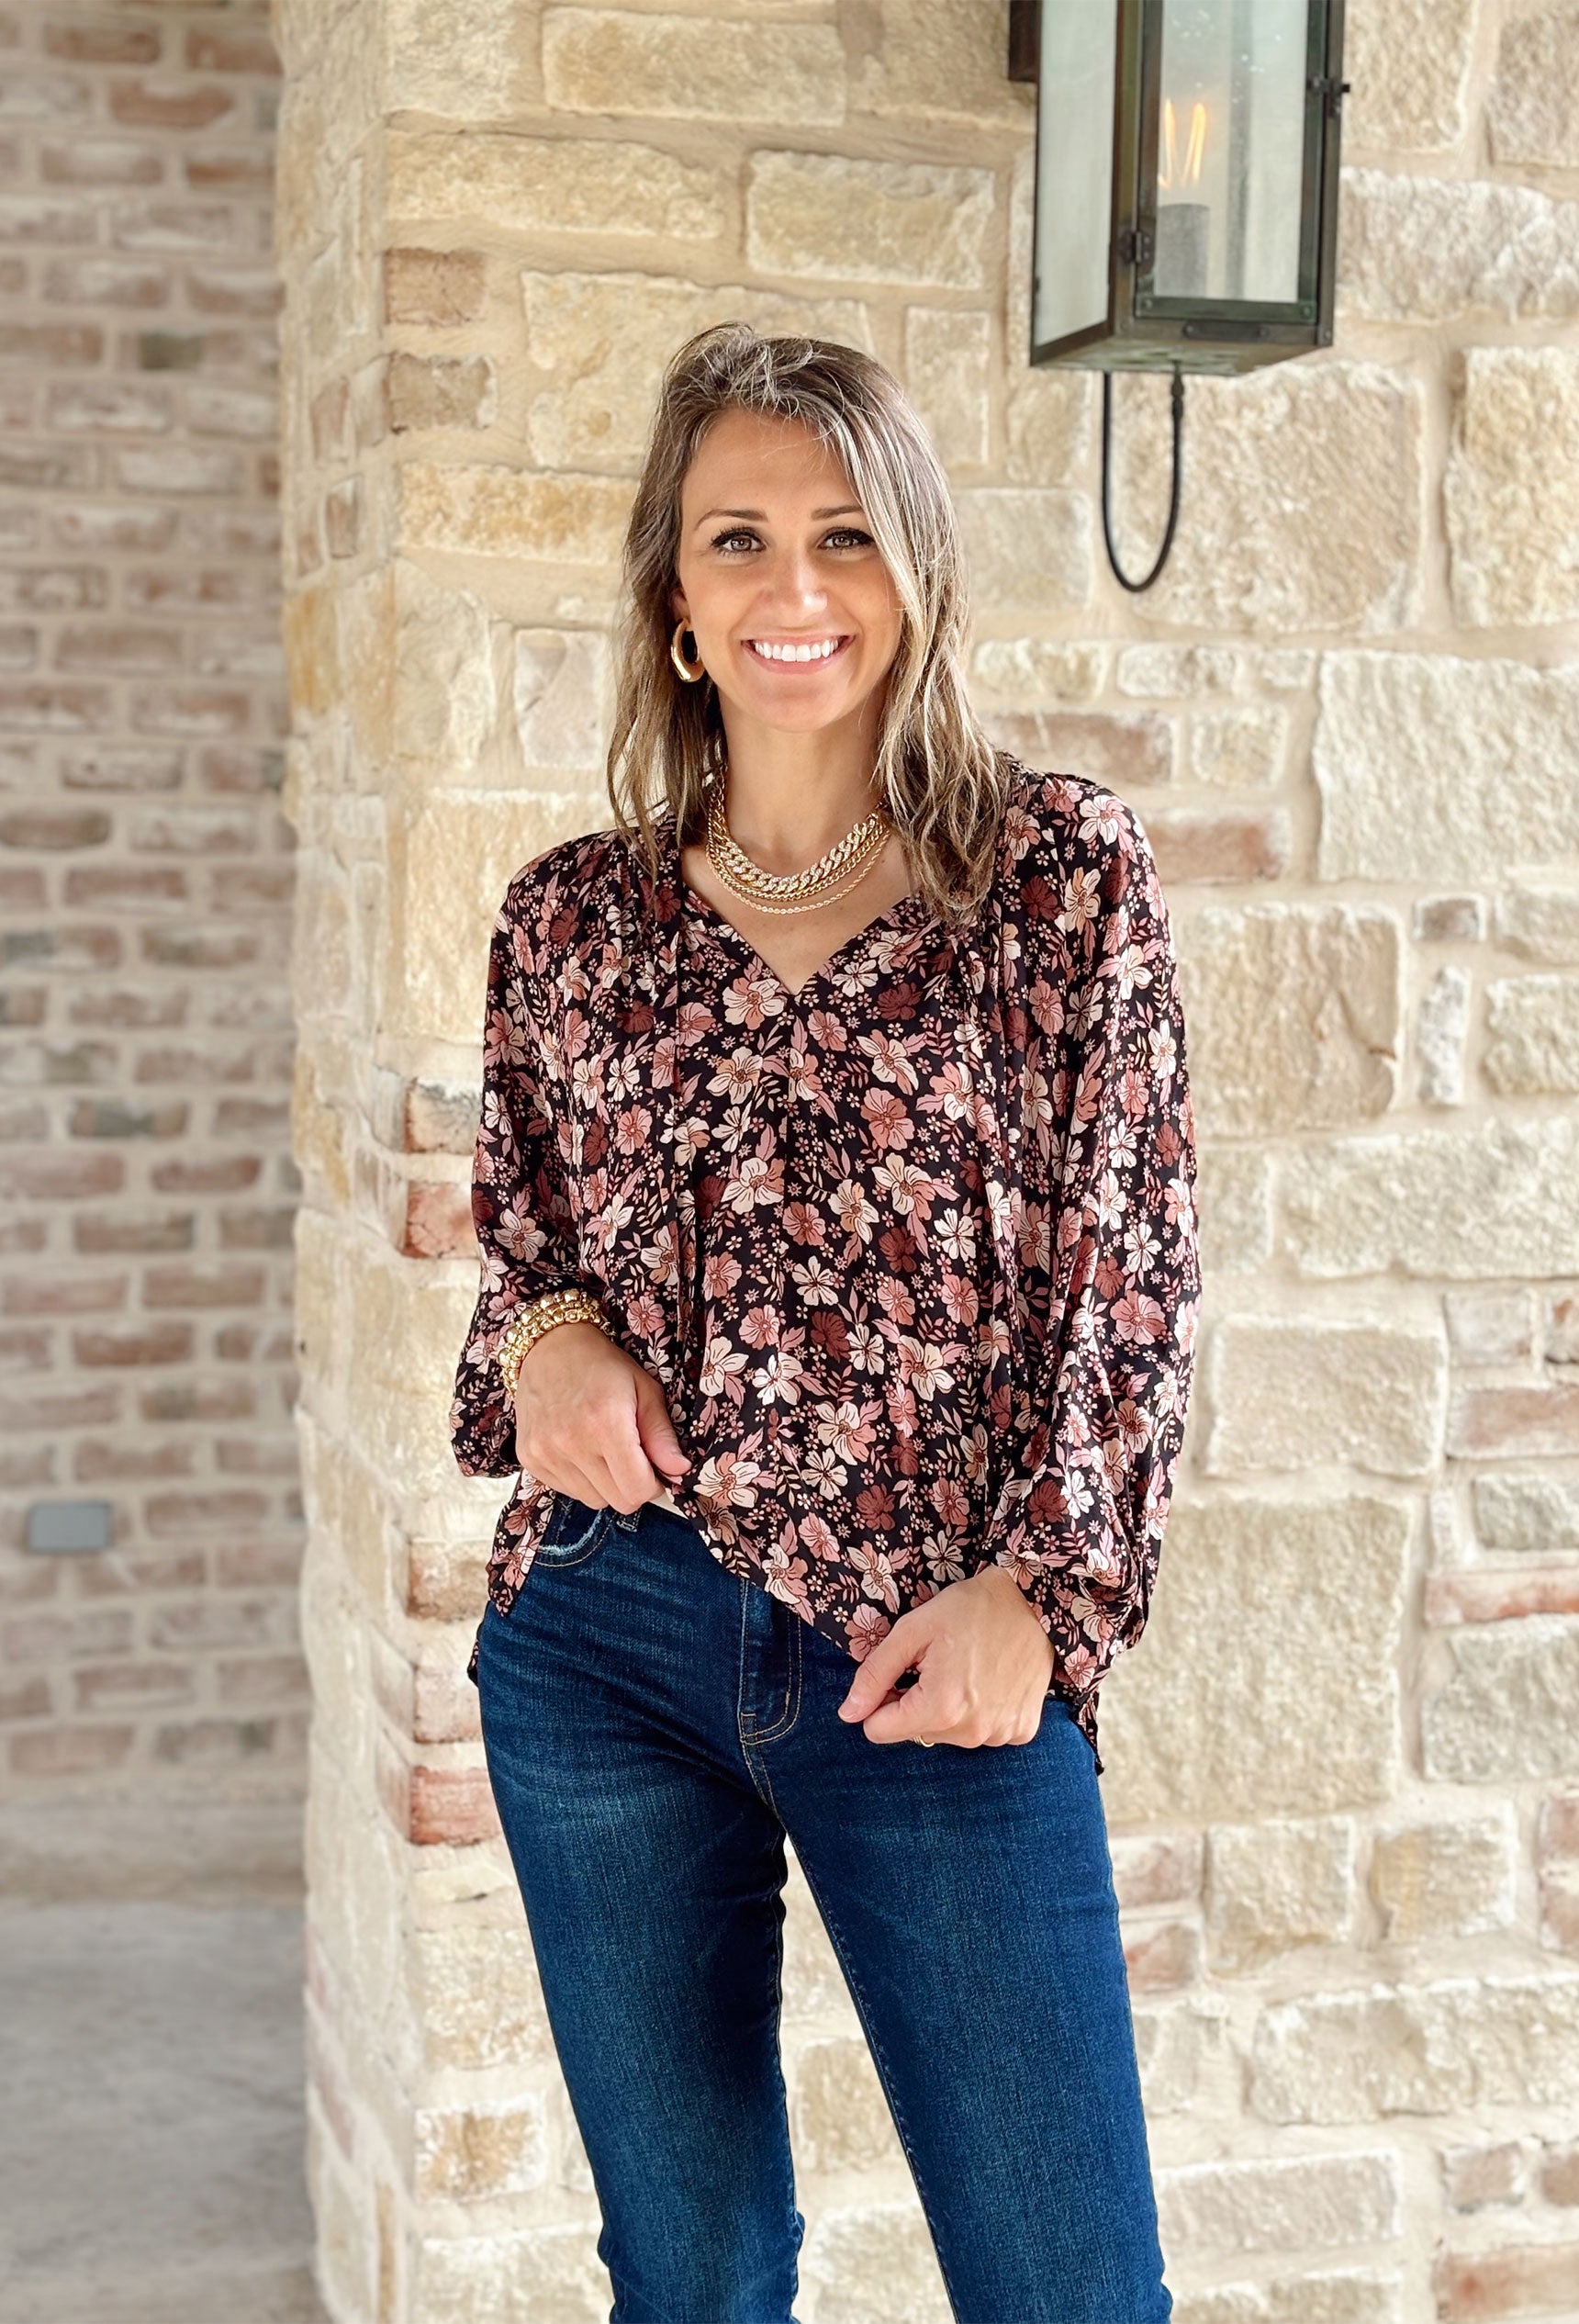 My Wishes Floral Blouse, black blouse with mauve, light pink, and terracotta floral printing on it